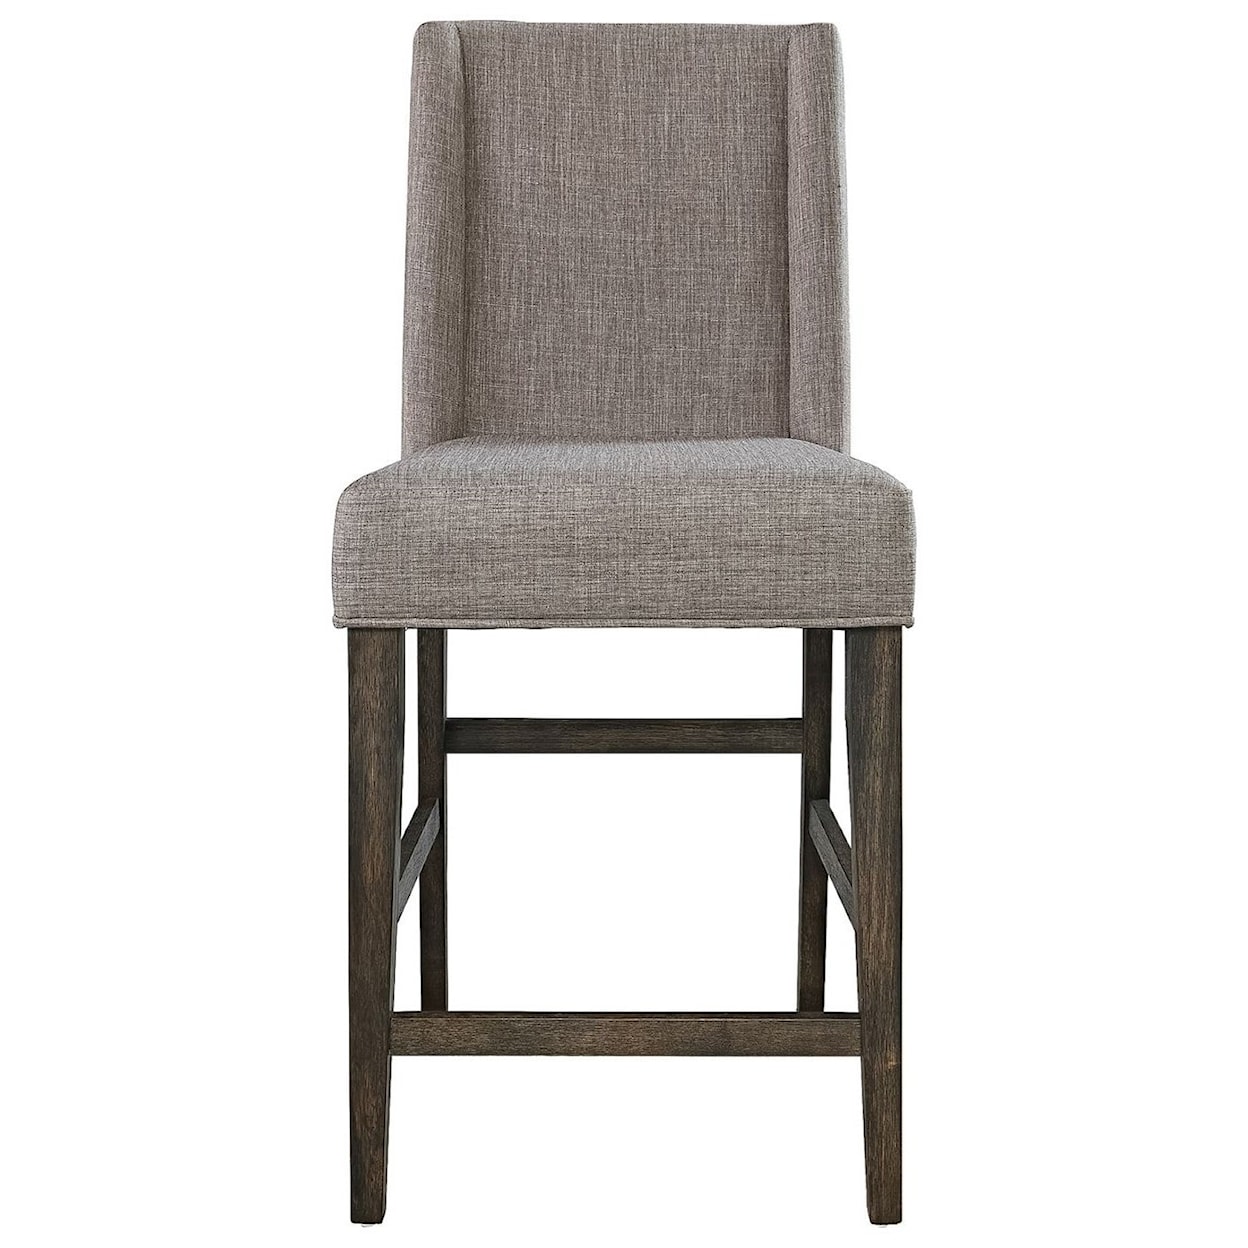 Liberty Furniture Double Bridge Upholstered Counter-Height Dining Chair